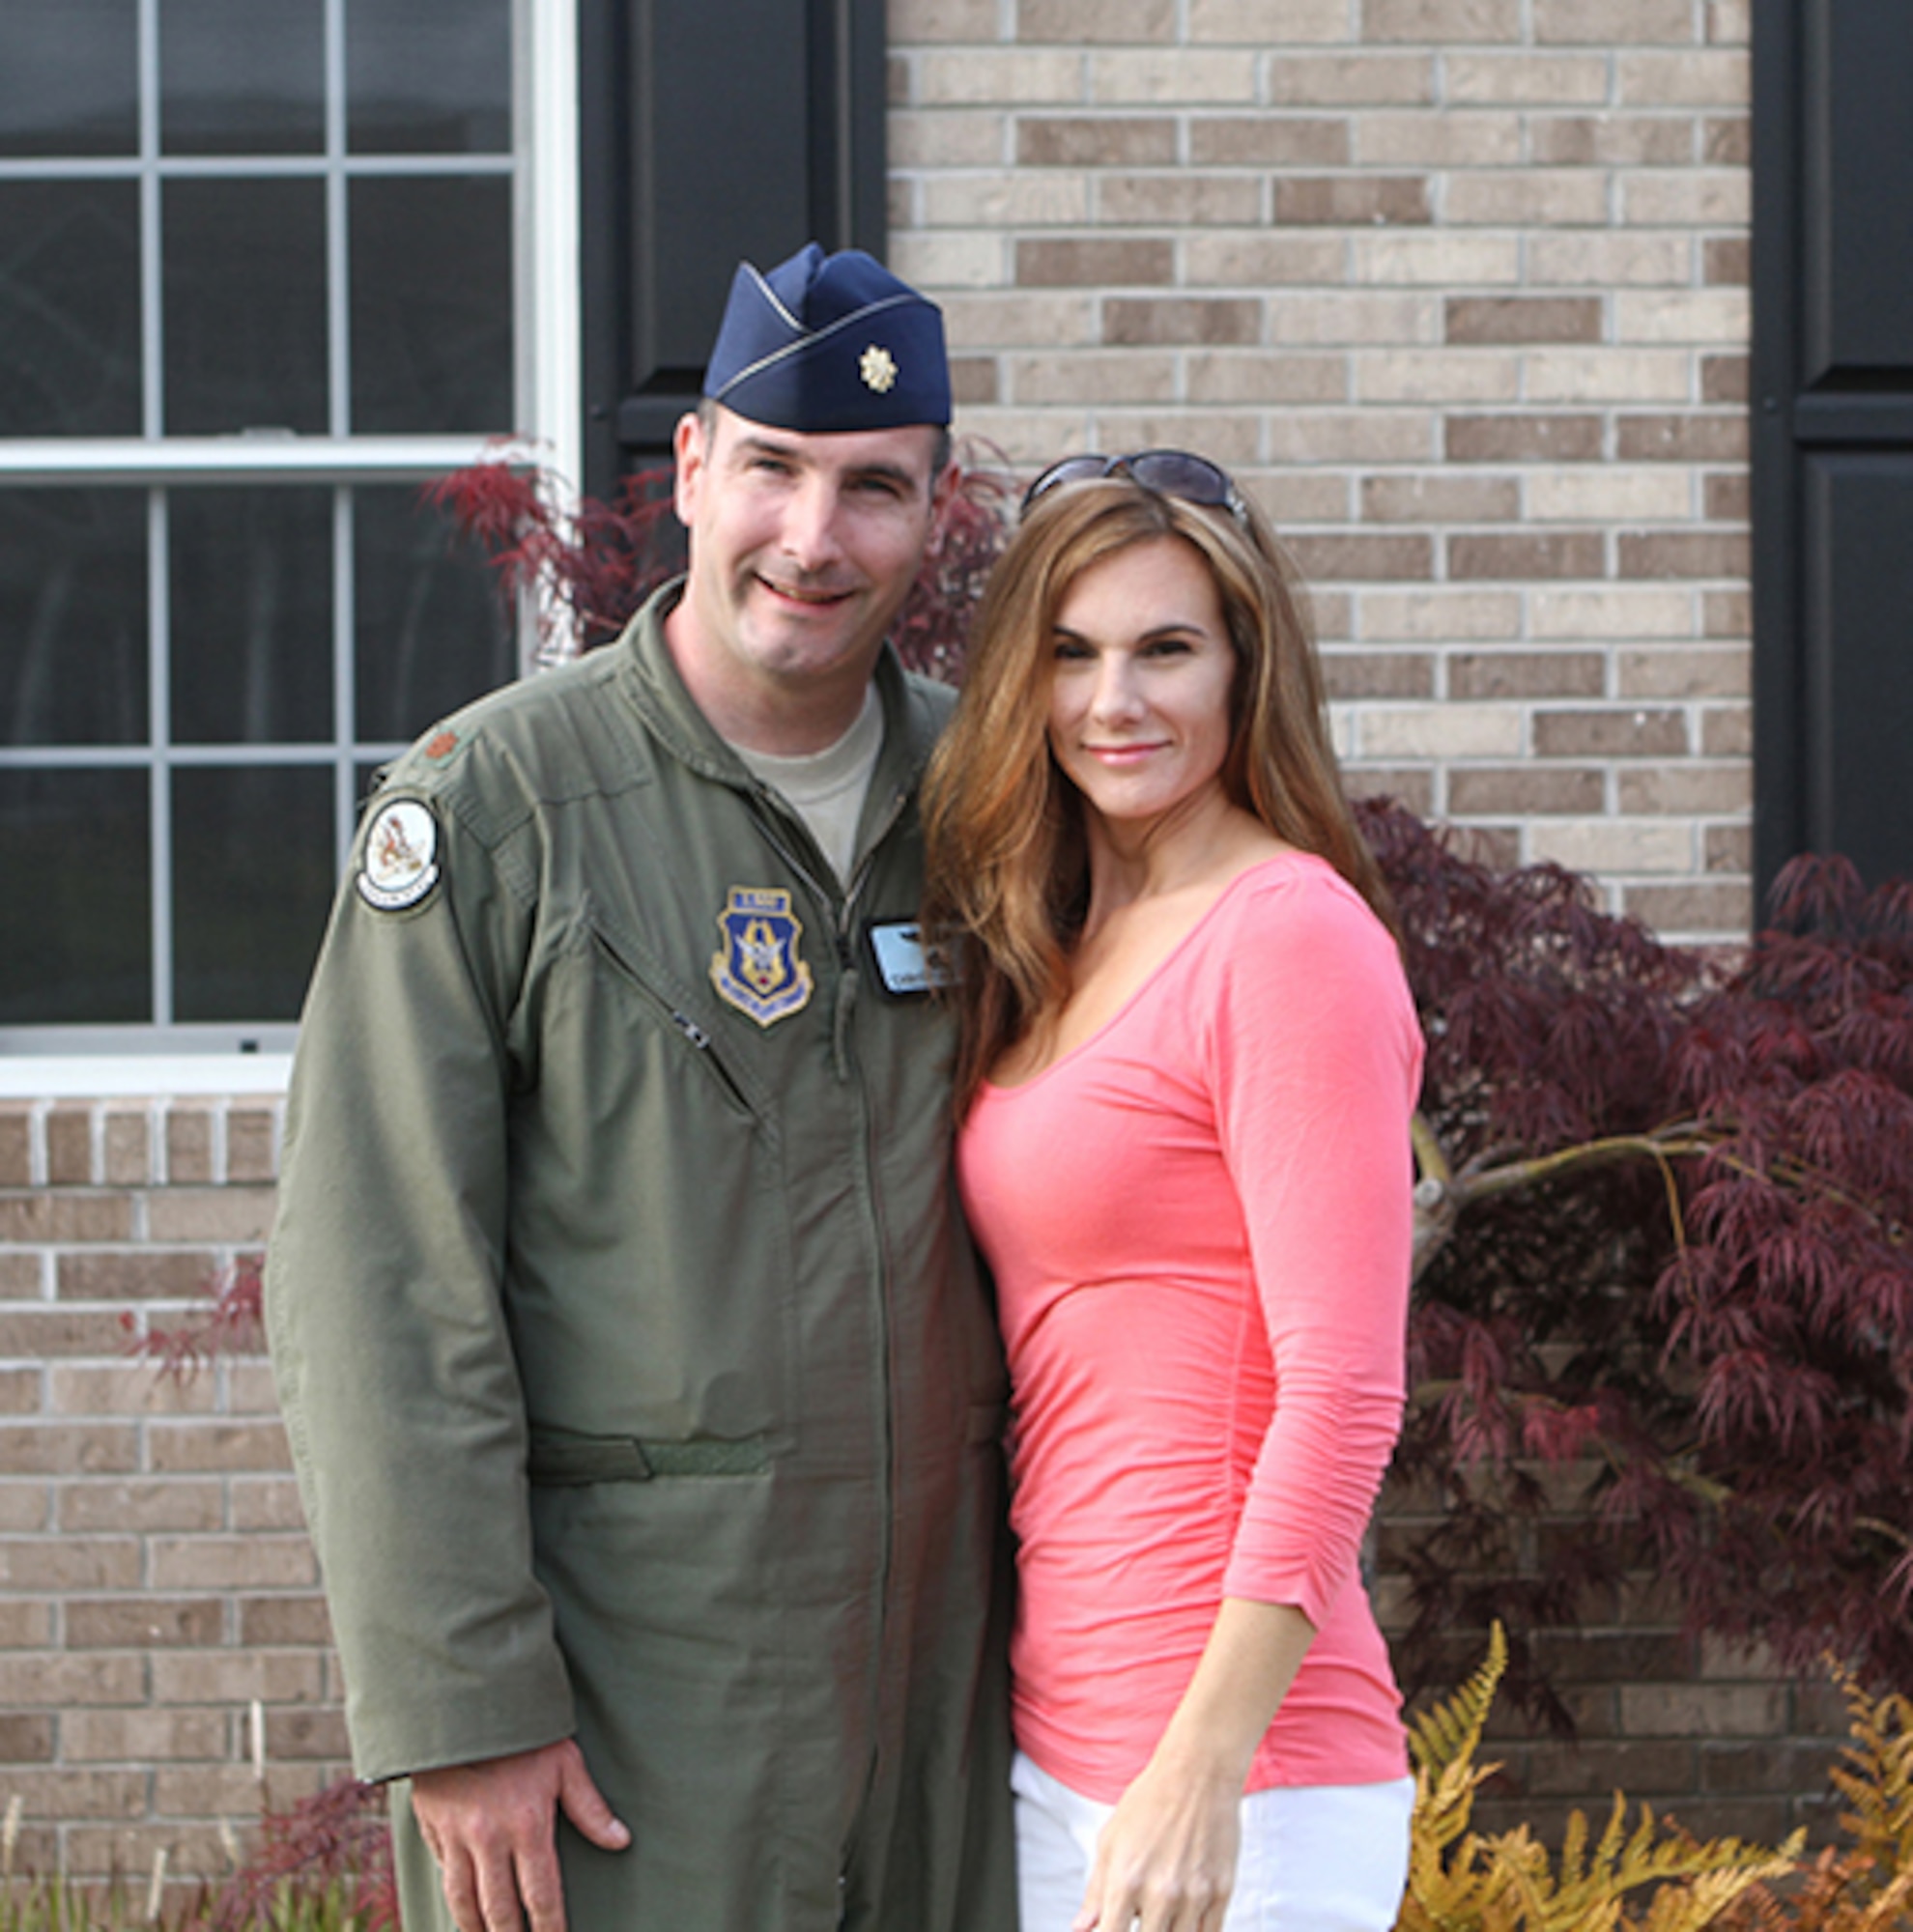 In Magnolia, Del., Dawn Fiore stands with her husband Maj. Christian Fiore, a Reserve pilot assigned to the 326th Airlift Squadron, Dover Air Base, Del., April 30, 2012. For half of their marriage, Dawn had battled multiple sclerosis discreetly until she went public in 2012 in an online feature interview about her battling her disease with fitness and martial arts. (Courtesy photo)